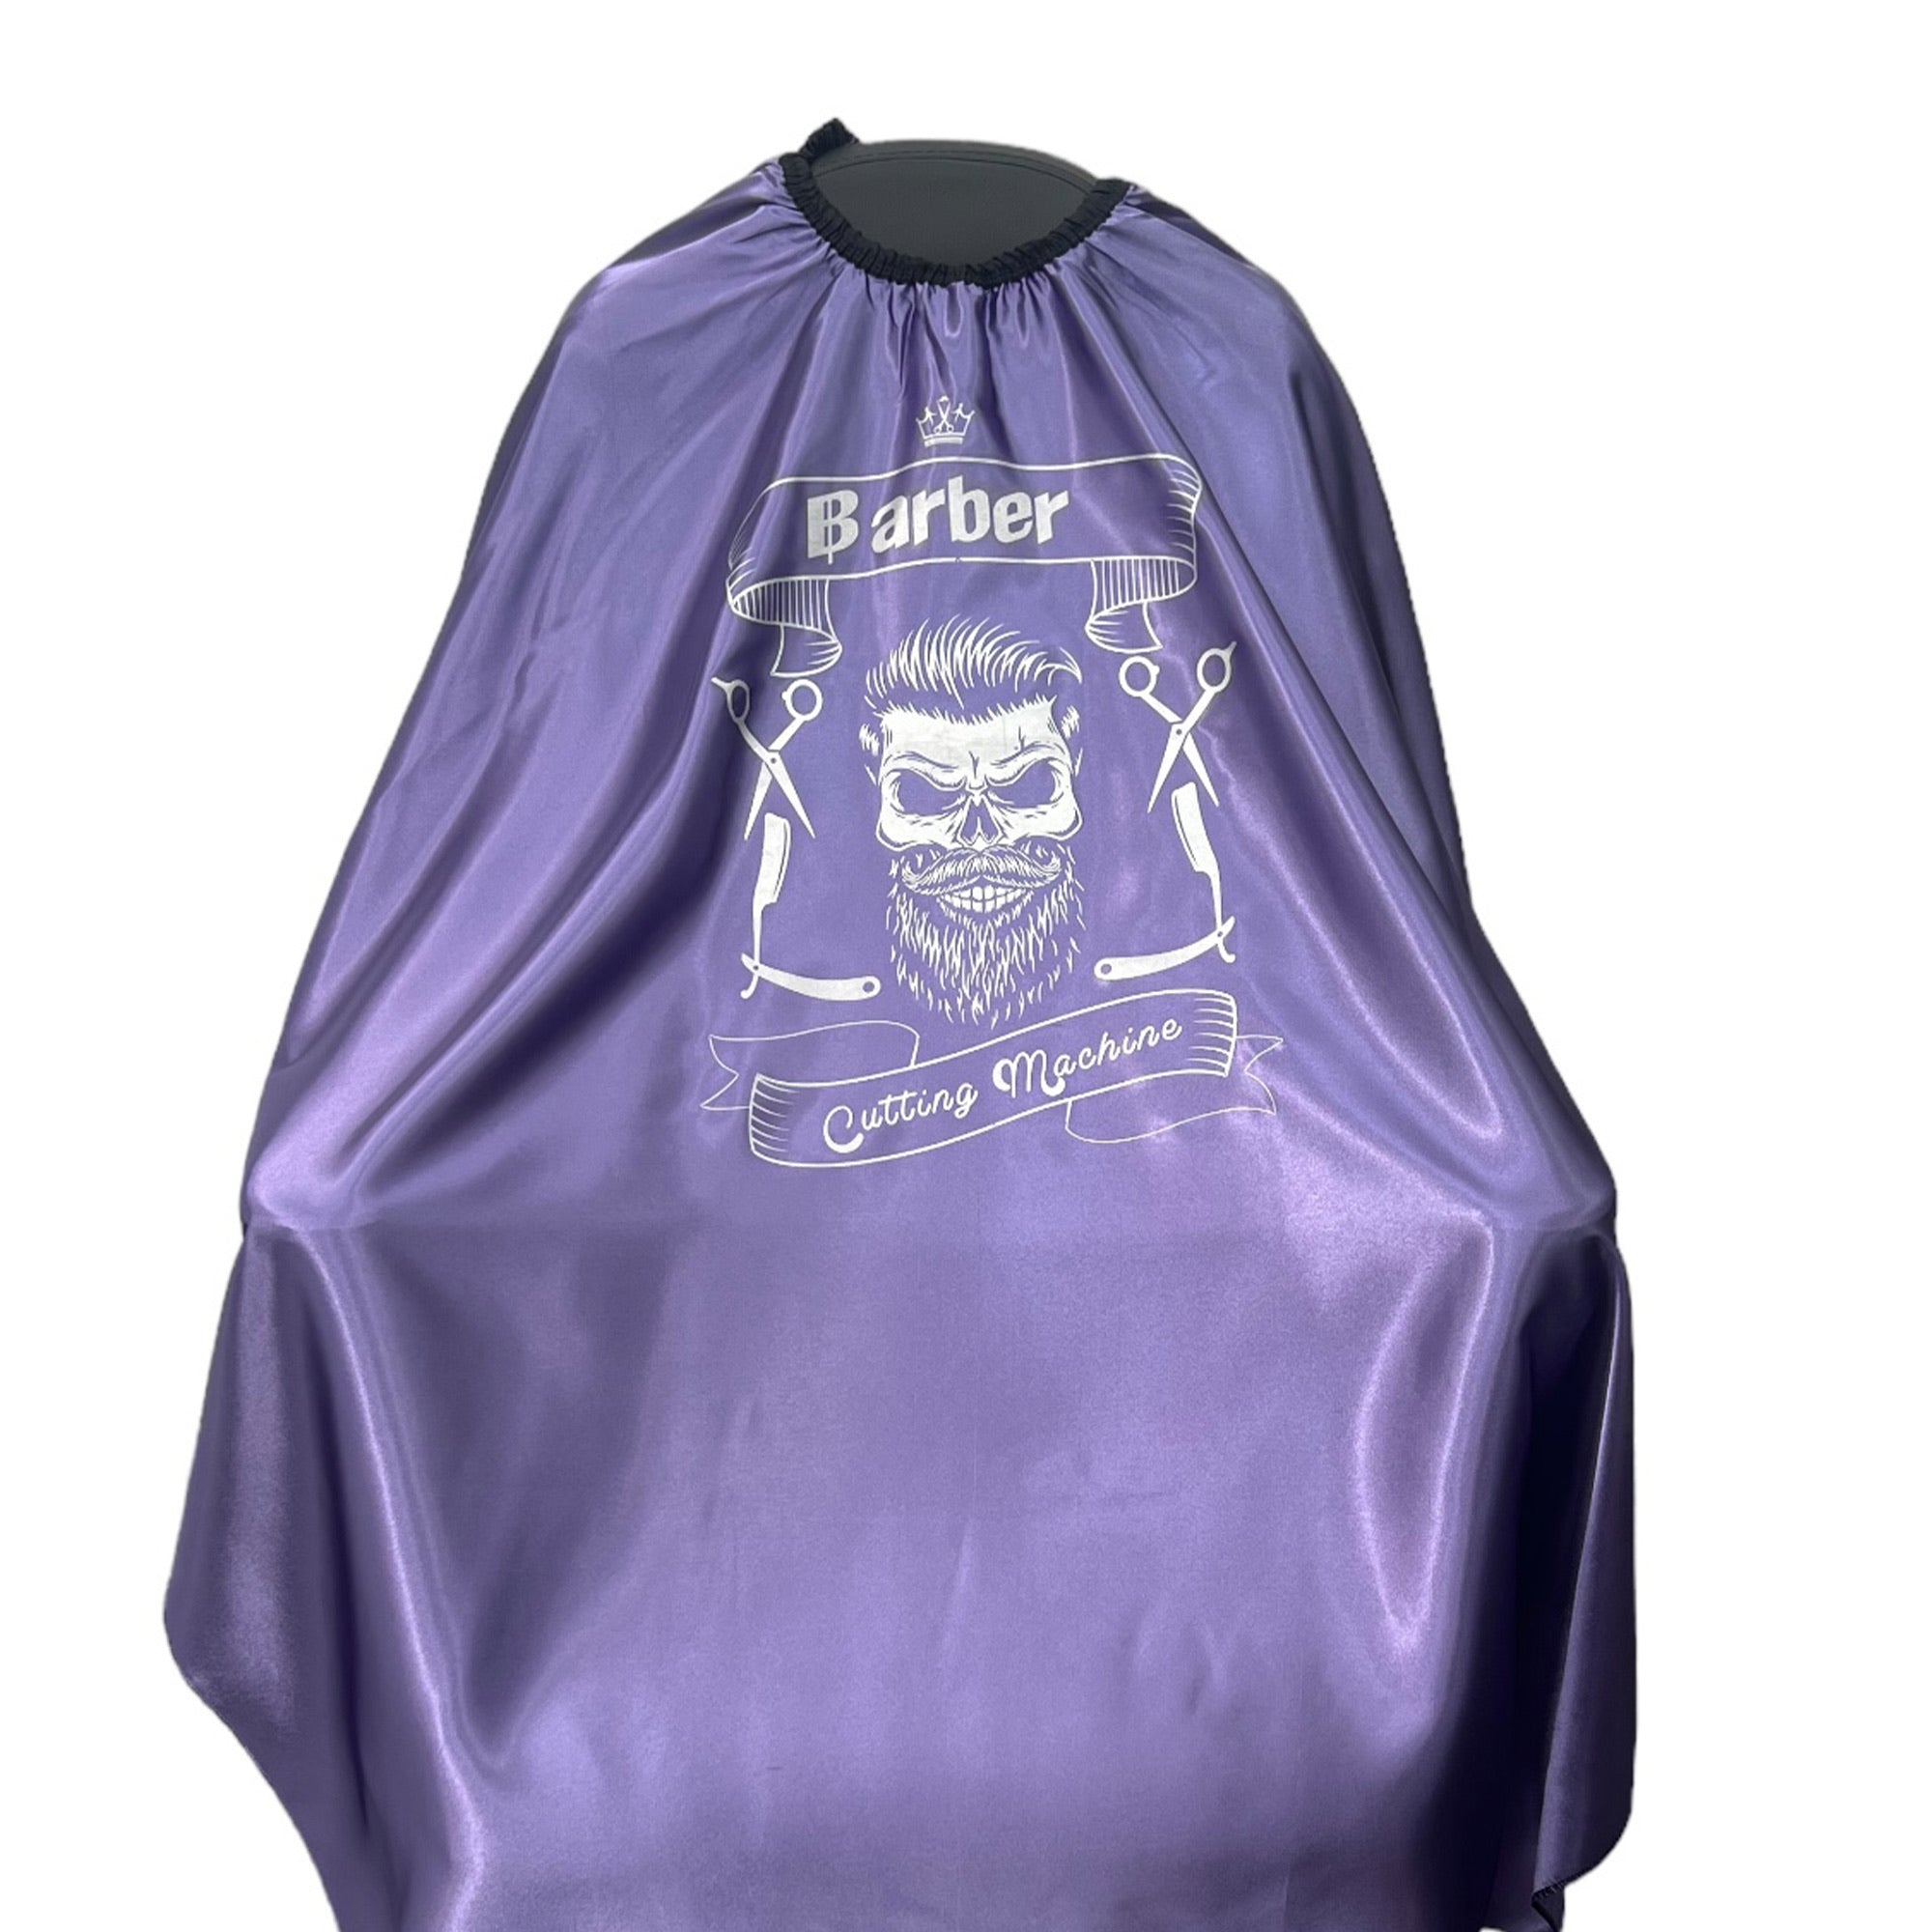 Gabri - Barber Hairdressing Hair Cutting Capes & Gowns Skull Pattern (Lila)